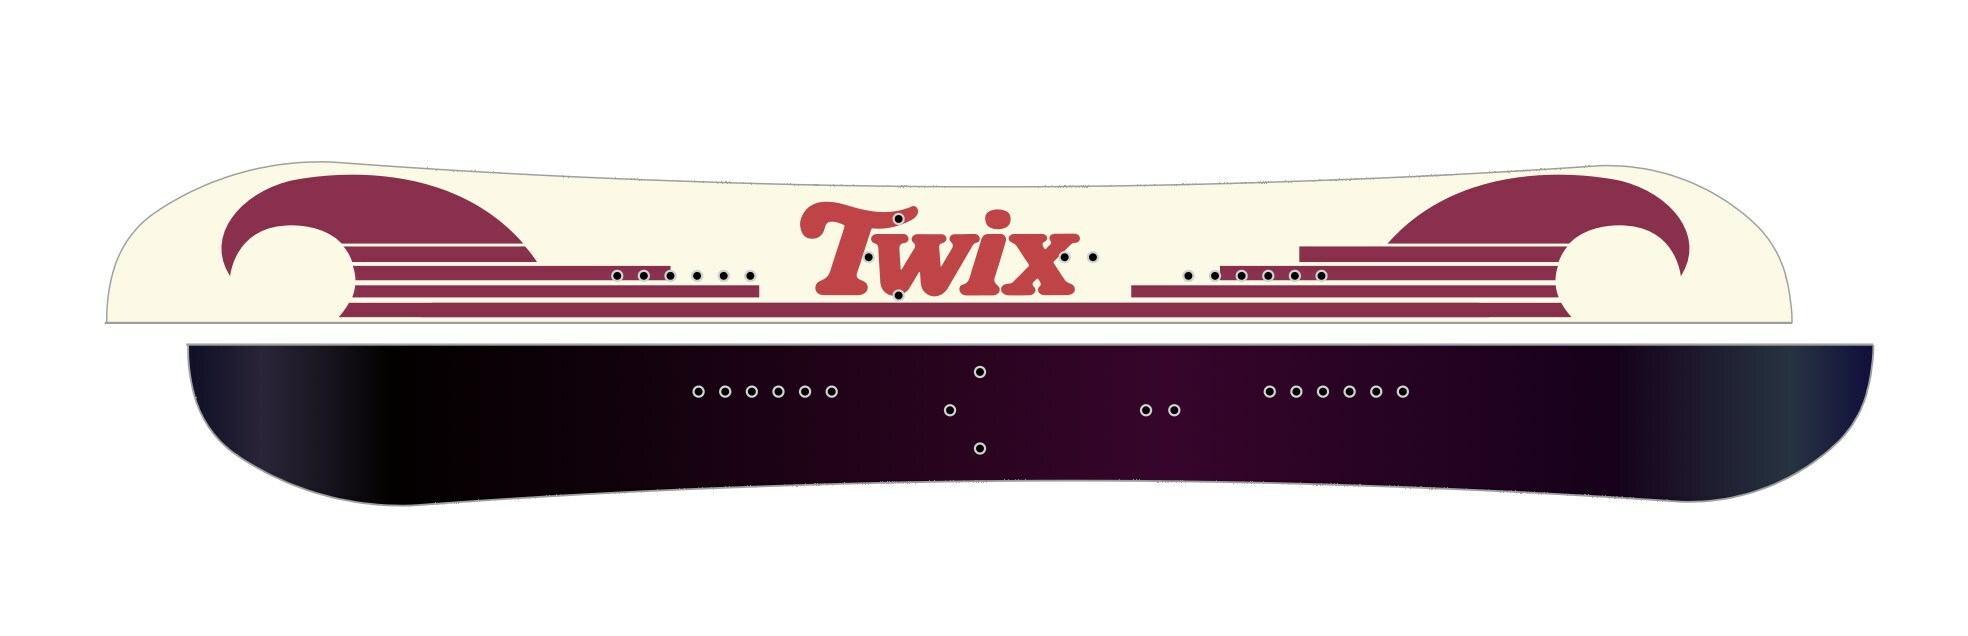 You can now design your own splitboard, courtesy of… Twix?